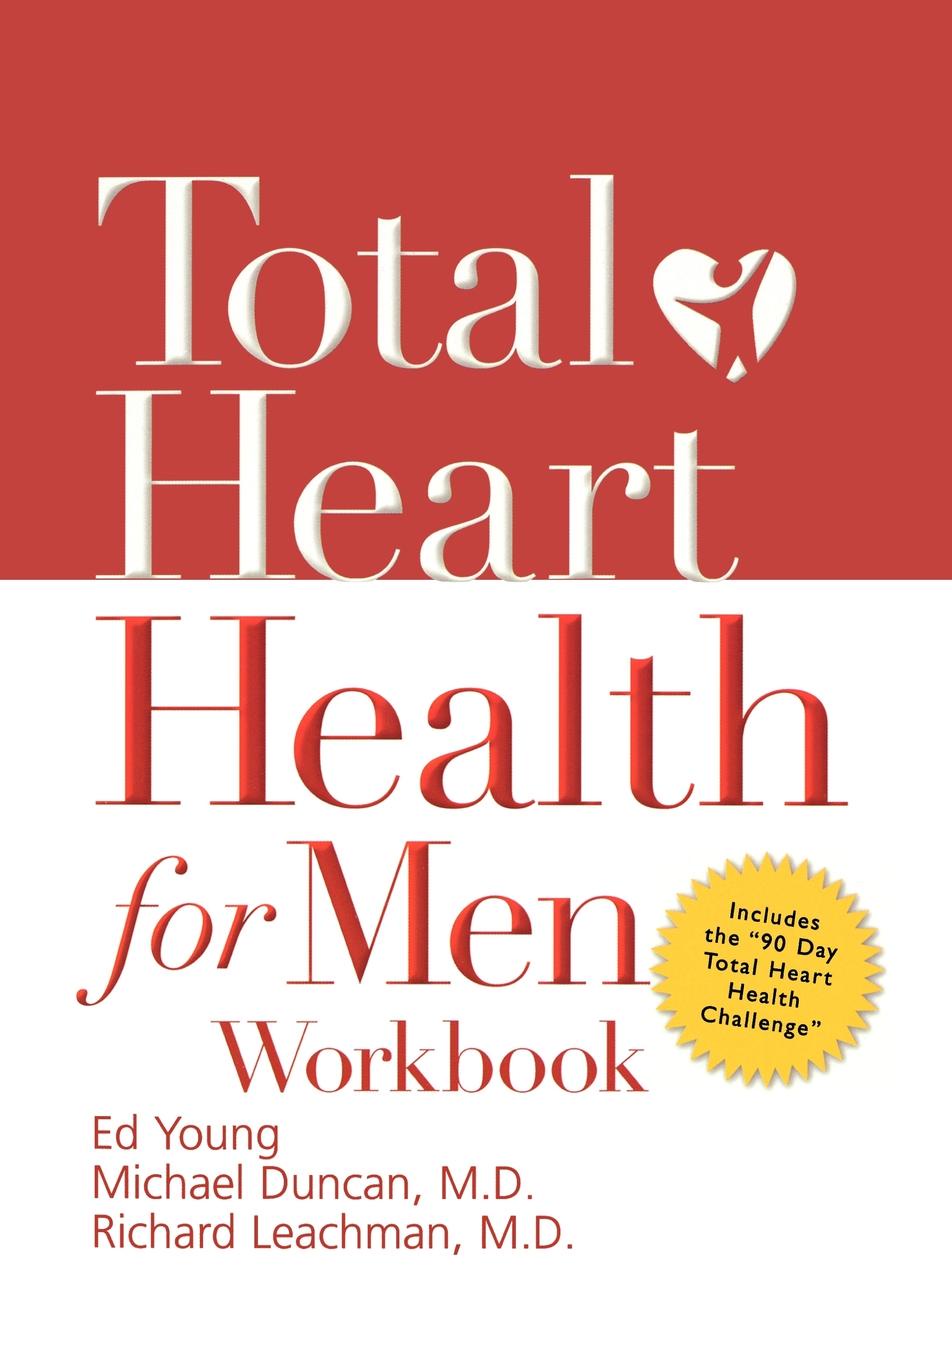 Total Heart Health for Men Workbook. Achieving a Total Heart Health Lifestyle in 90 Days